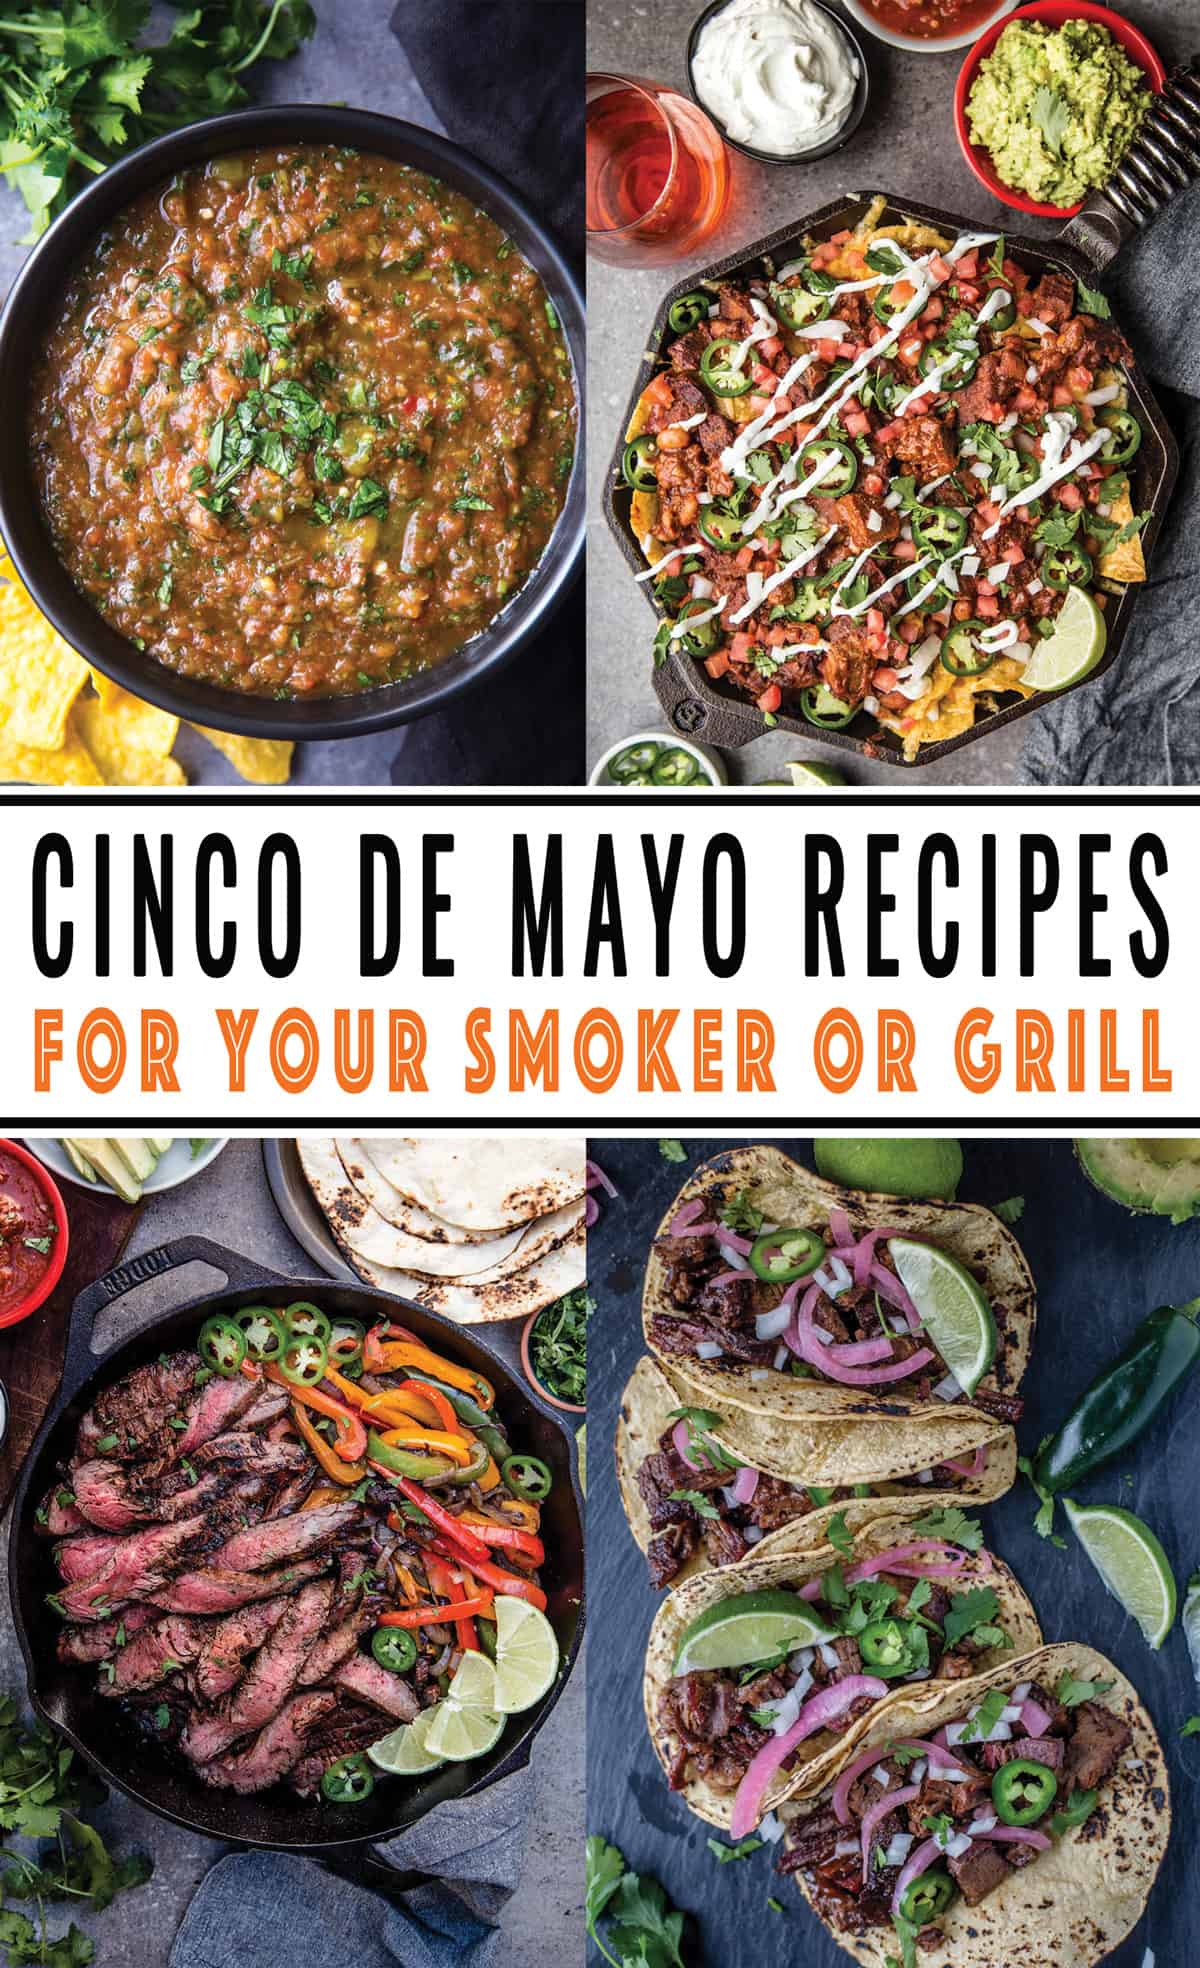 Cinco de Mayo recipes for the grill or smoker